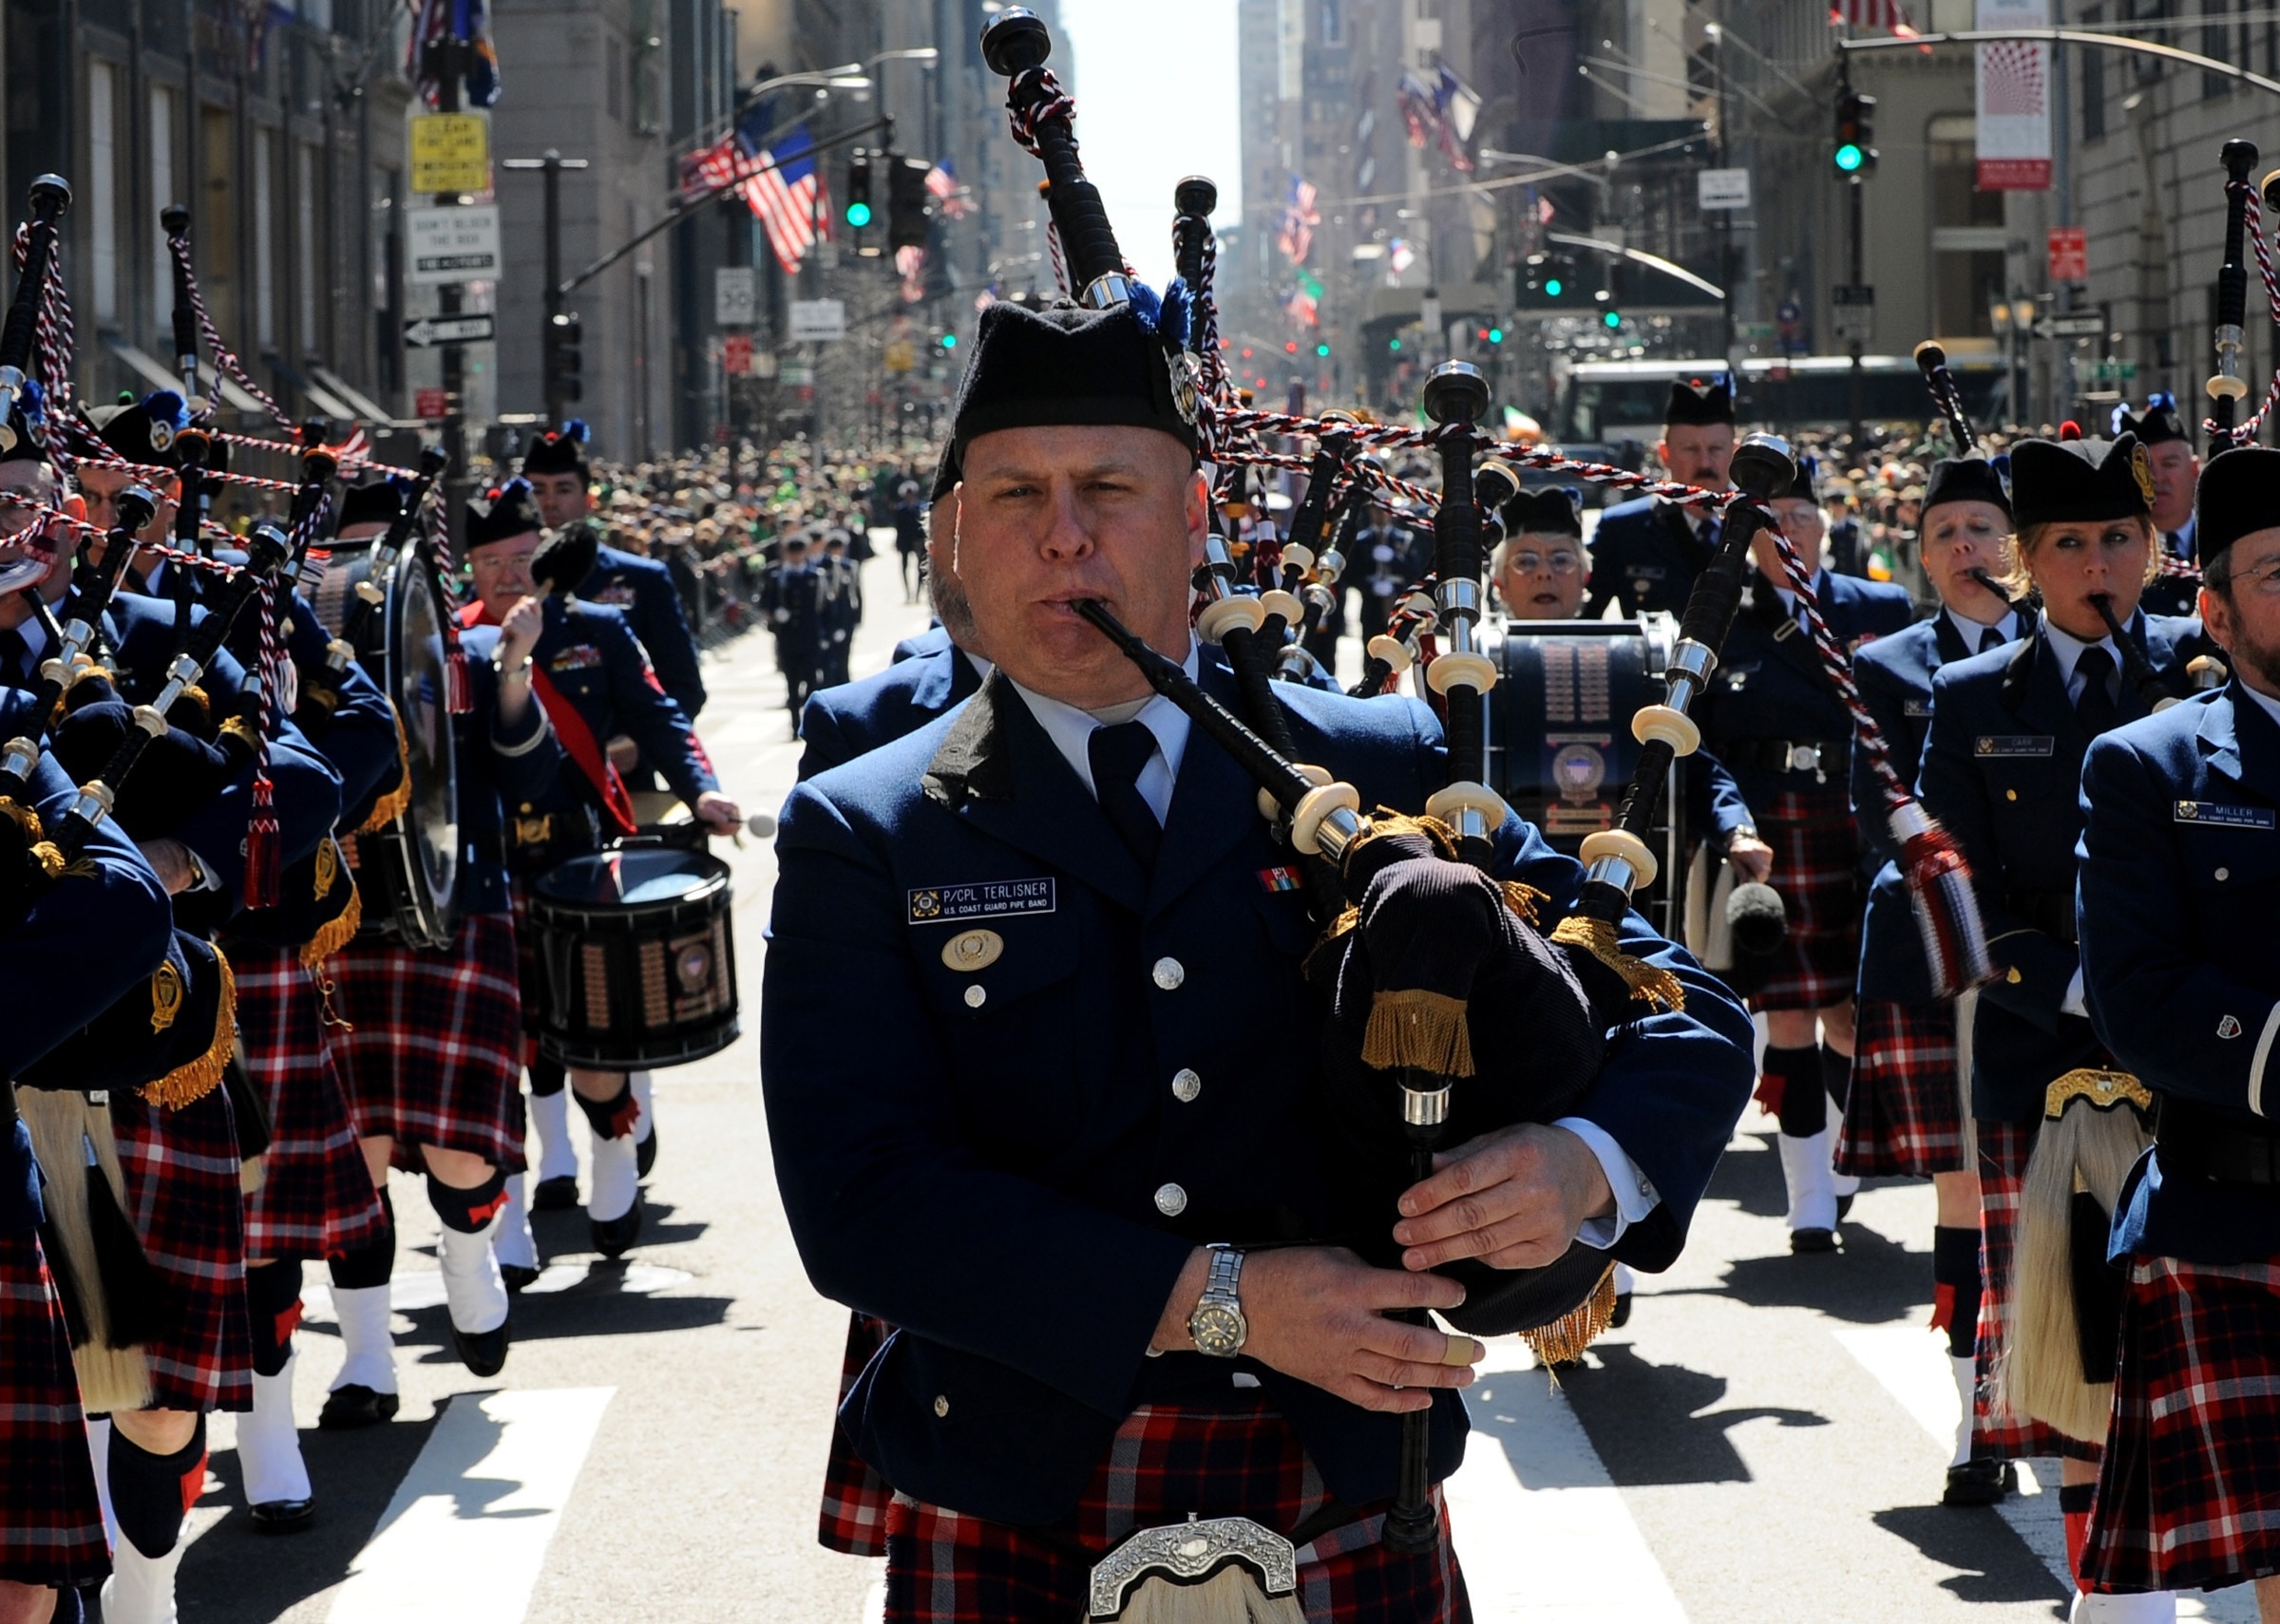 man in black and gray on parade playing bag pipes